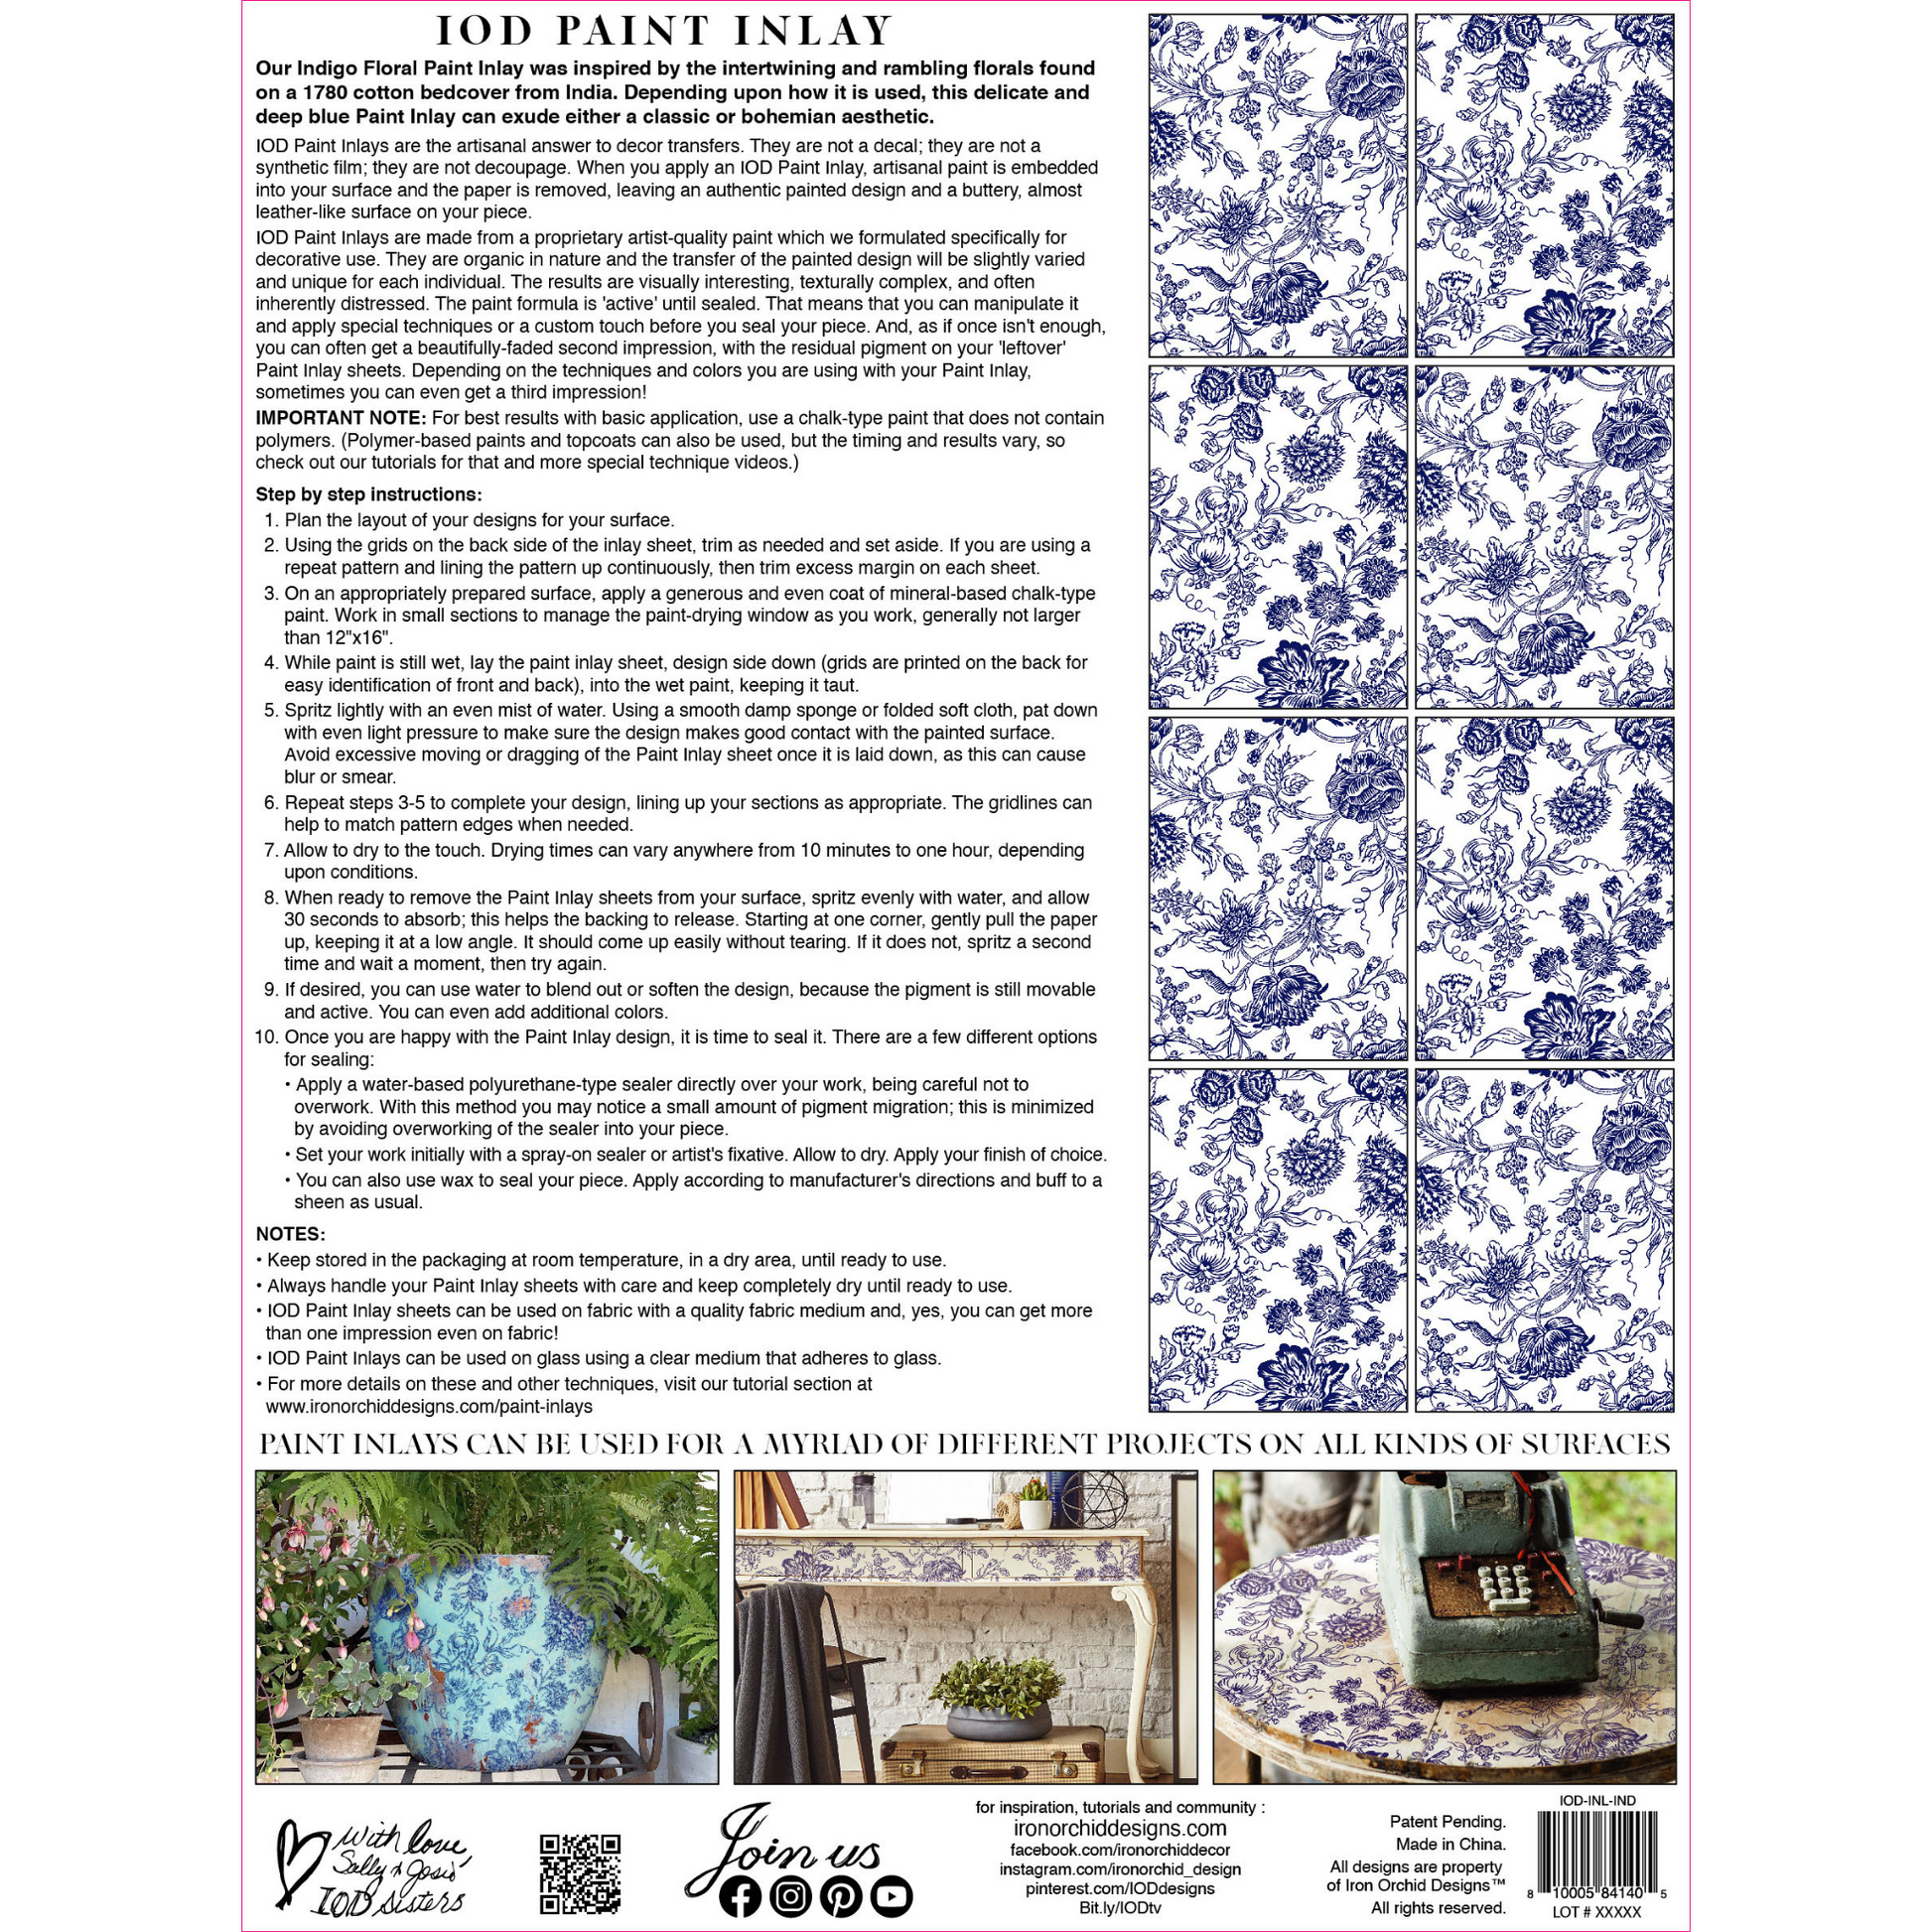 IOD Indigo Floral Paint Inlay product back cover with instructions by Iron Orchid Designs.  Contains eight 12" x 16" sheets. in navy and white florals. Available at Milton's Daughter.